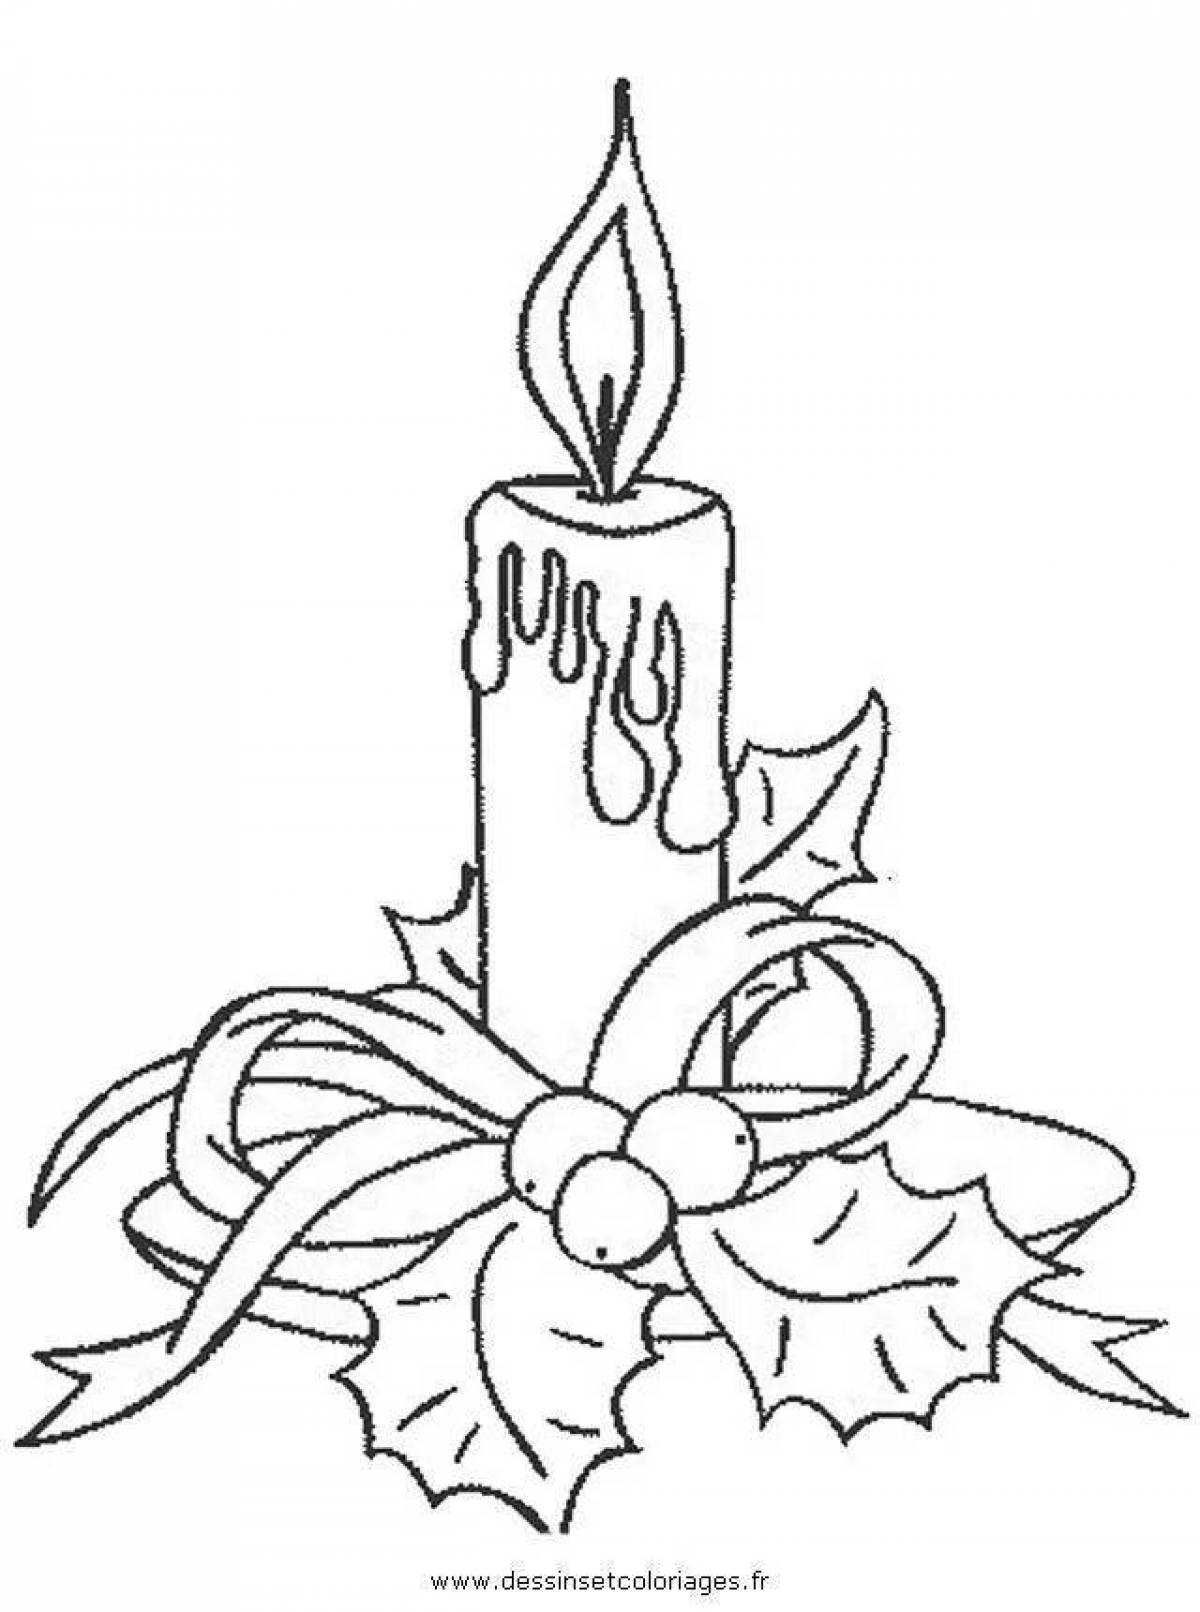 Colorful christmas candle coloring page